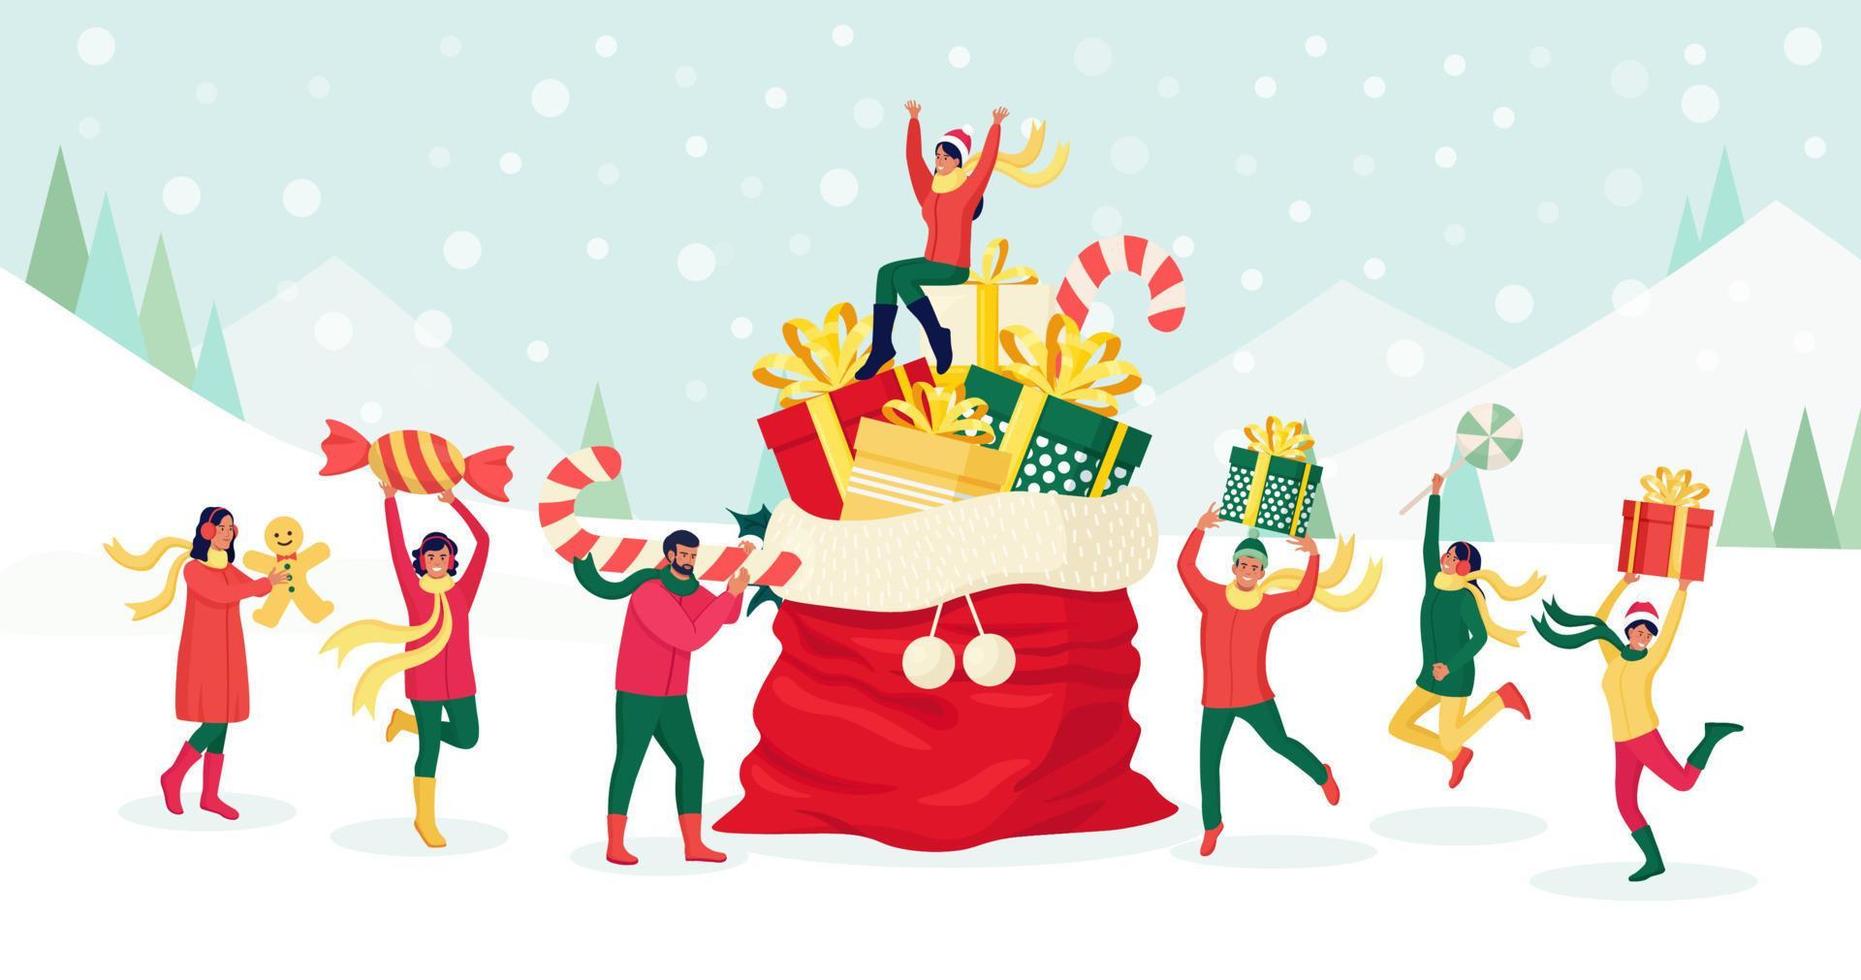 Tiny People Prepare for Christmas and New Year Holiday Celebration. Characters Carry Huge Candy Cane, Gift Box, Sweets, Gingerbread man near Big Santa Sack with Heap of Presents and Festive Decor vector